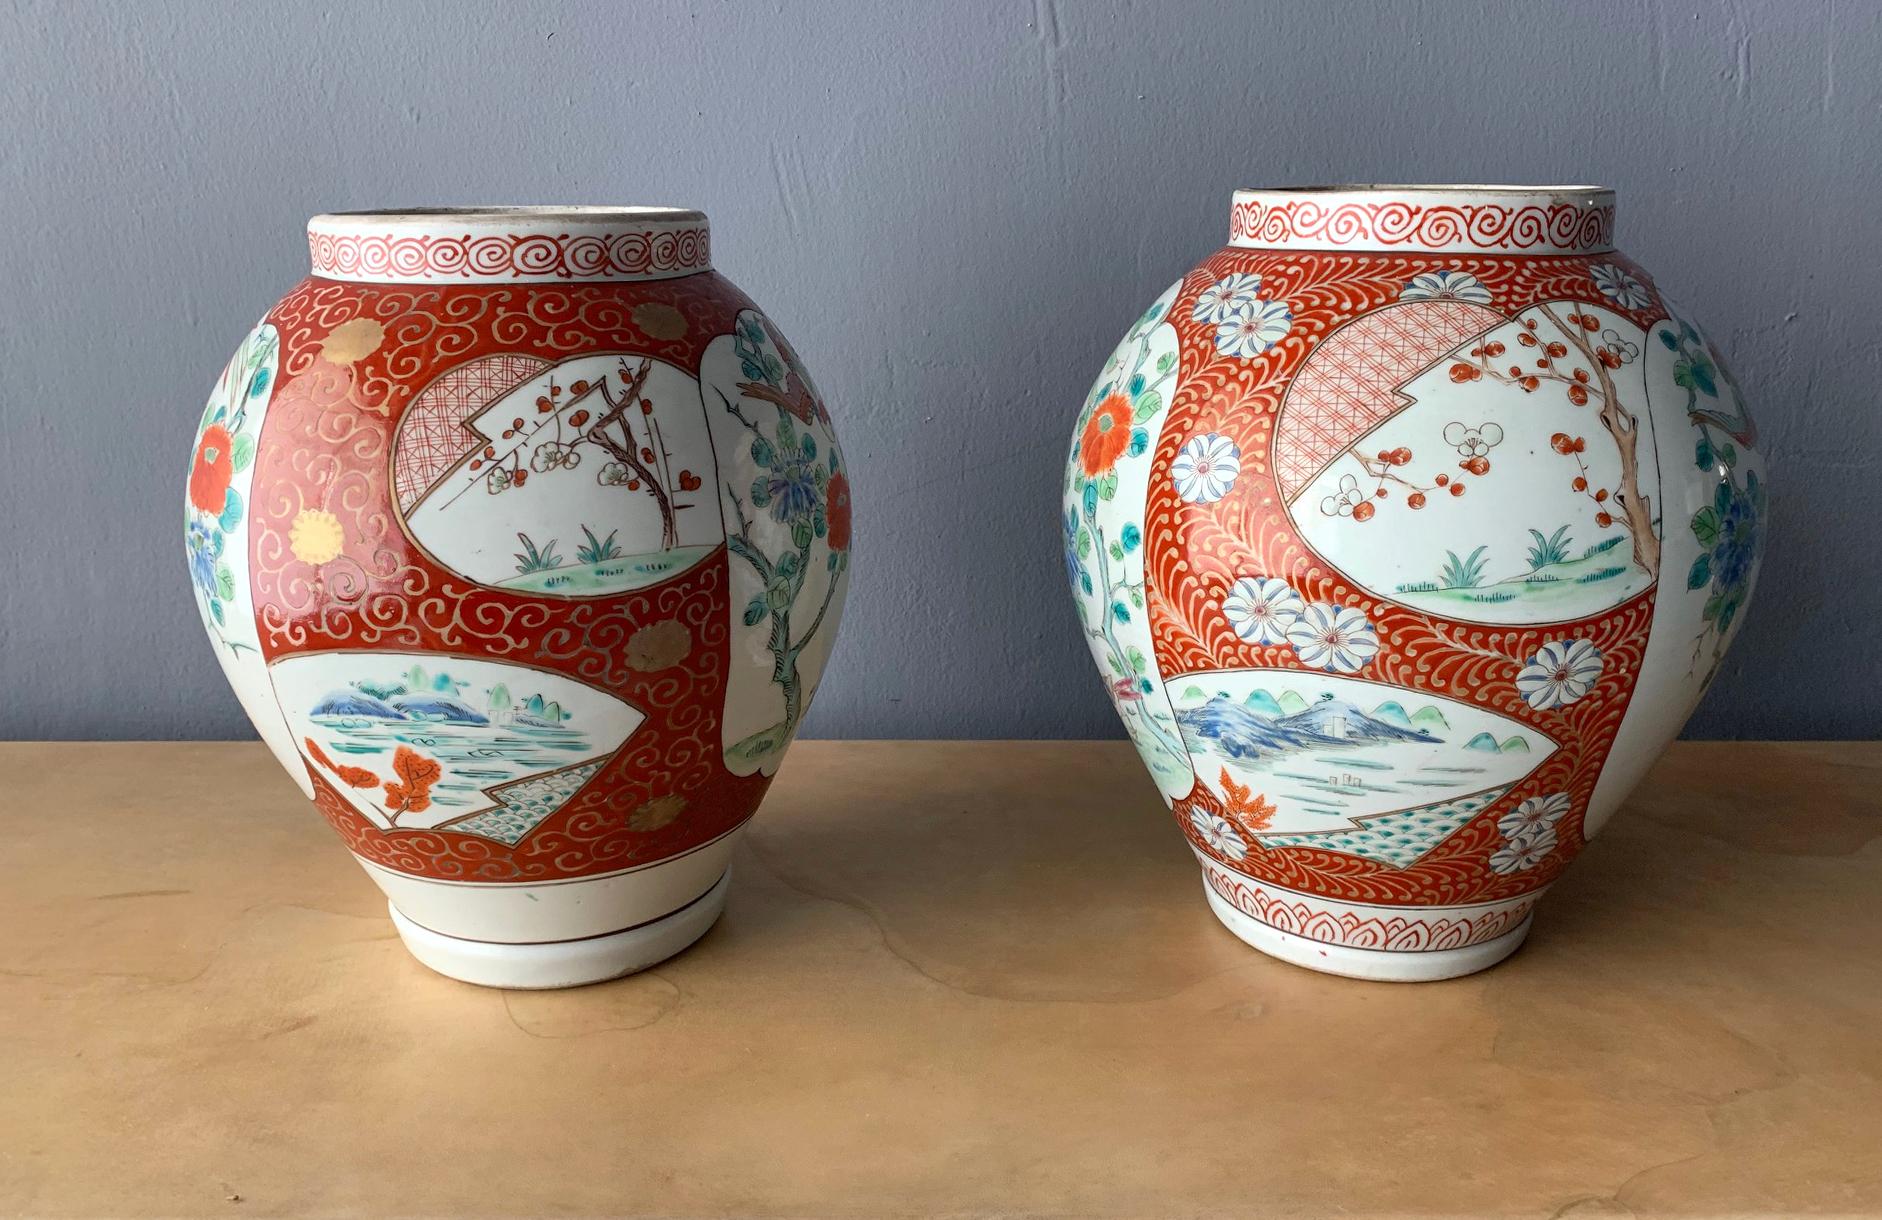 A near pair Hizen pottery jars from Artia Japan, circa mid-19th century of the Meiji Era. Heavy stoneware construction with overglaze enamels that was inspired by Chinese WuCai from Ming dynasty. The lovely patterns depicts flying phoenix over